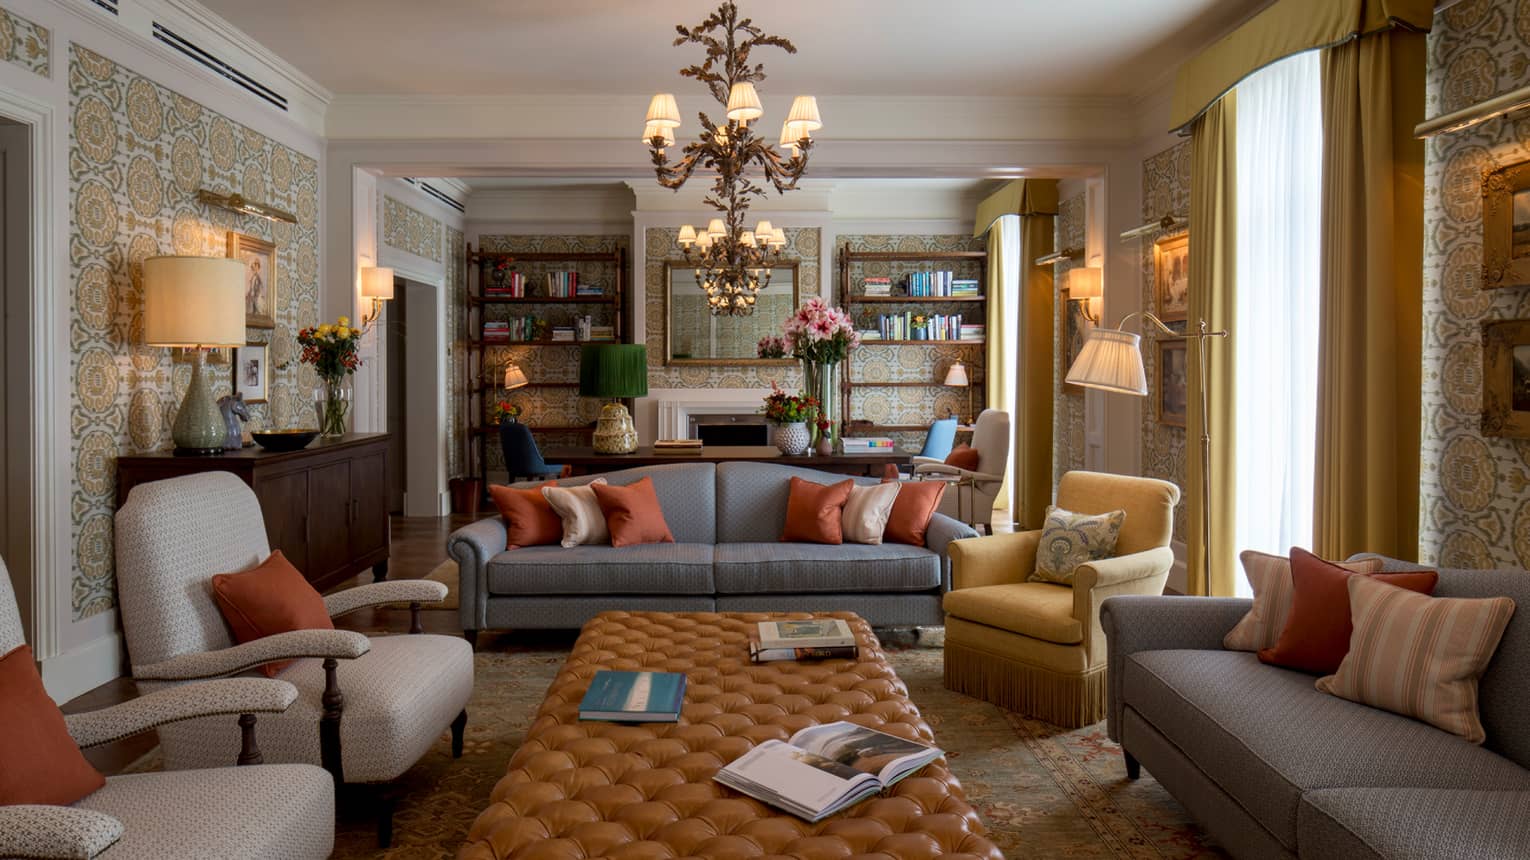 Royal Suite sofas, chairs around long tufted leather bench under chandeliers, bookshelves